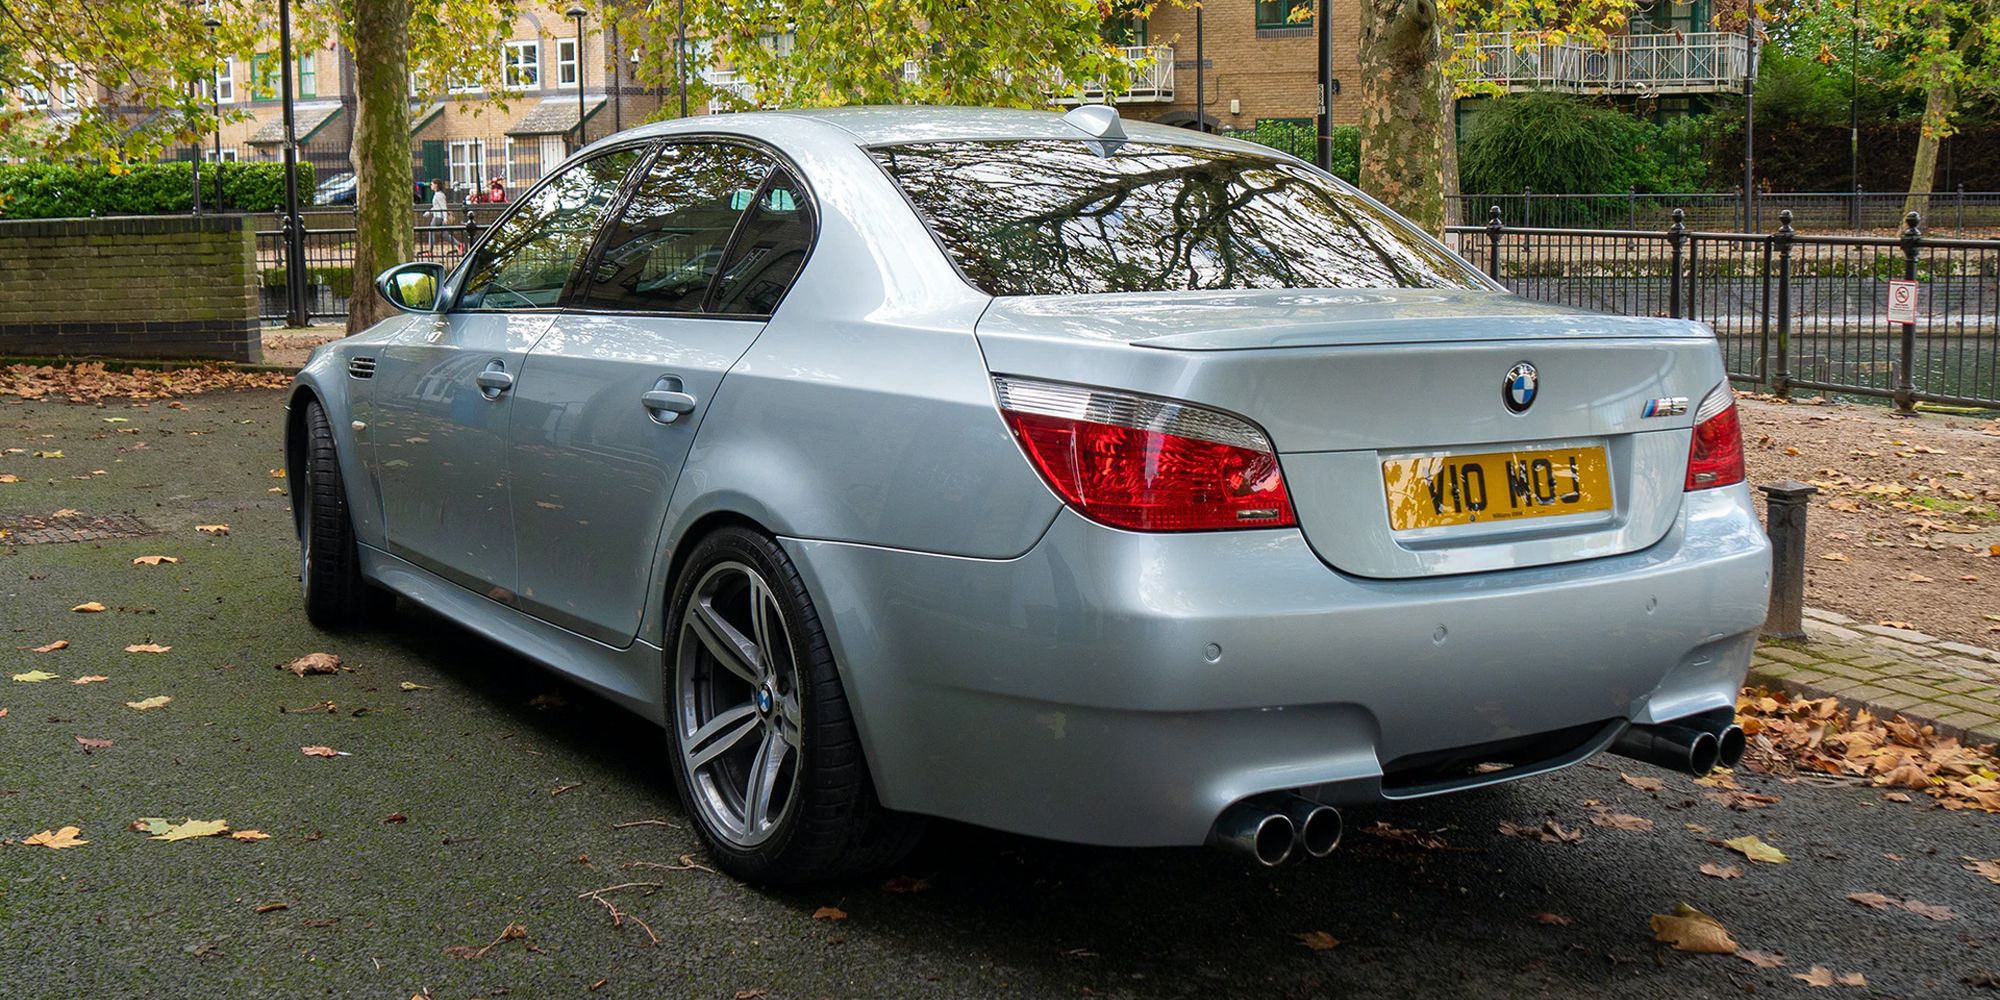 The rear of the E60 M5